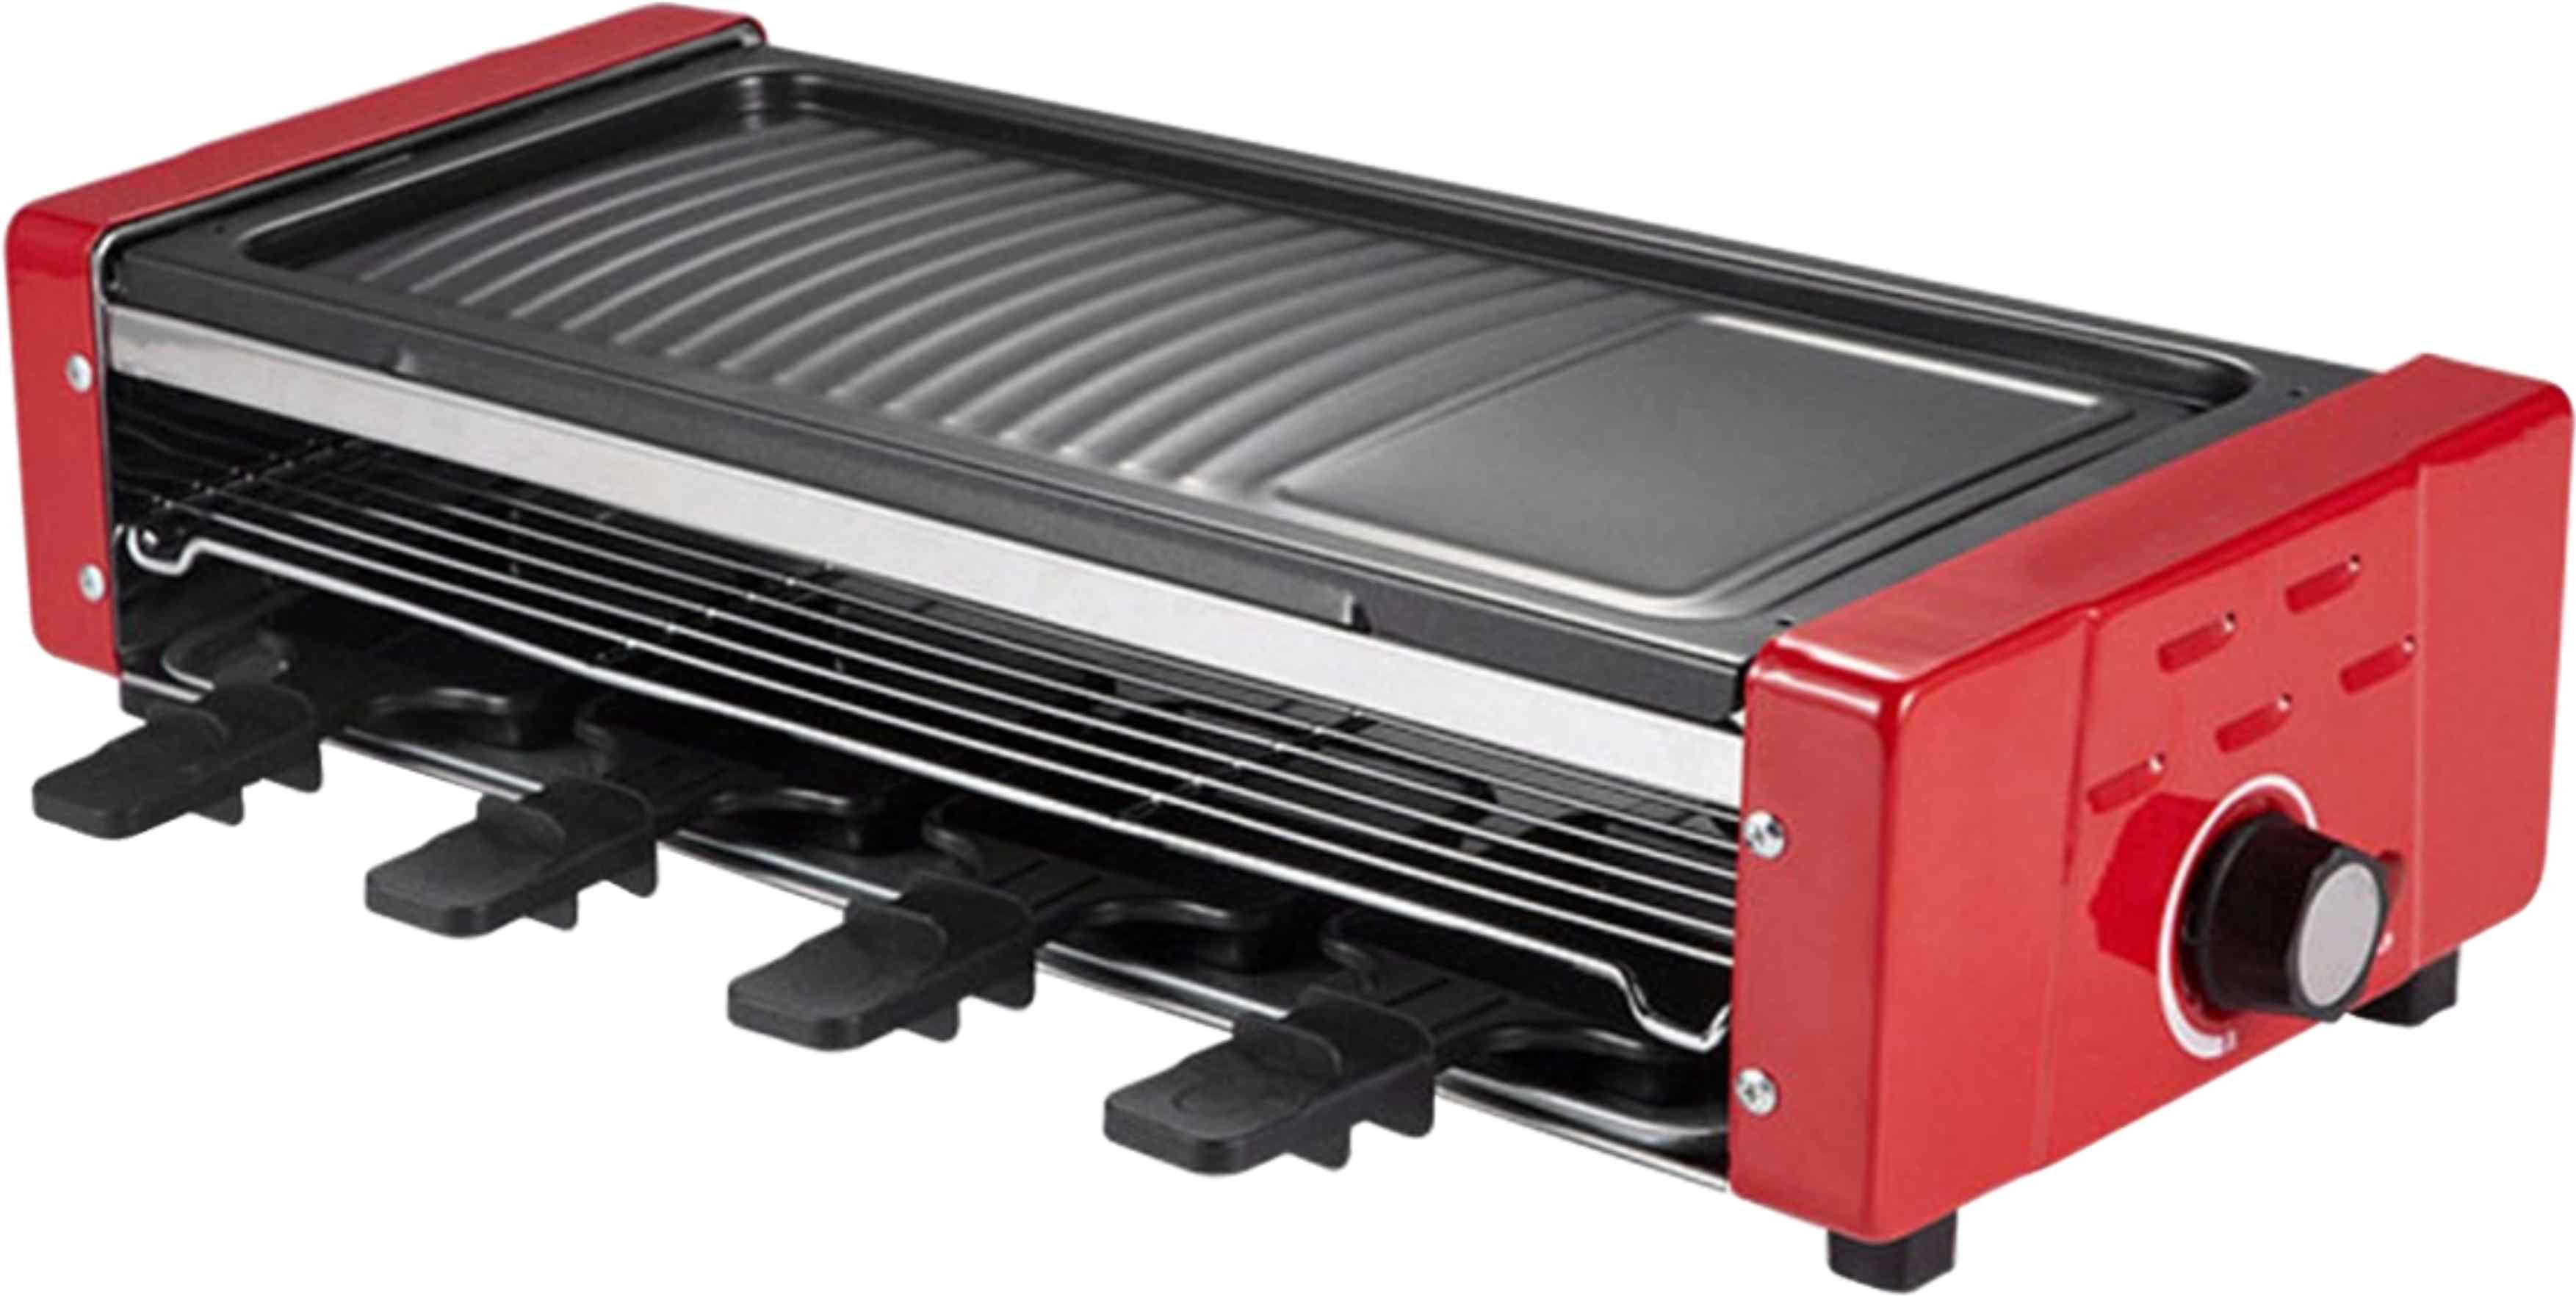 electric bbq grill with two layers